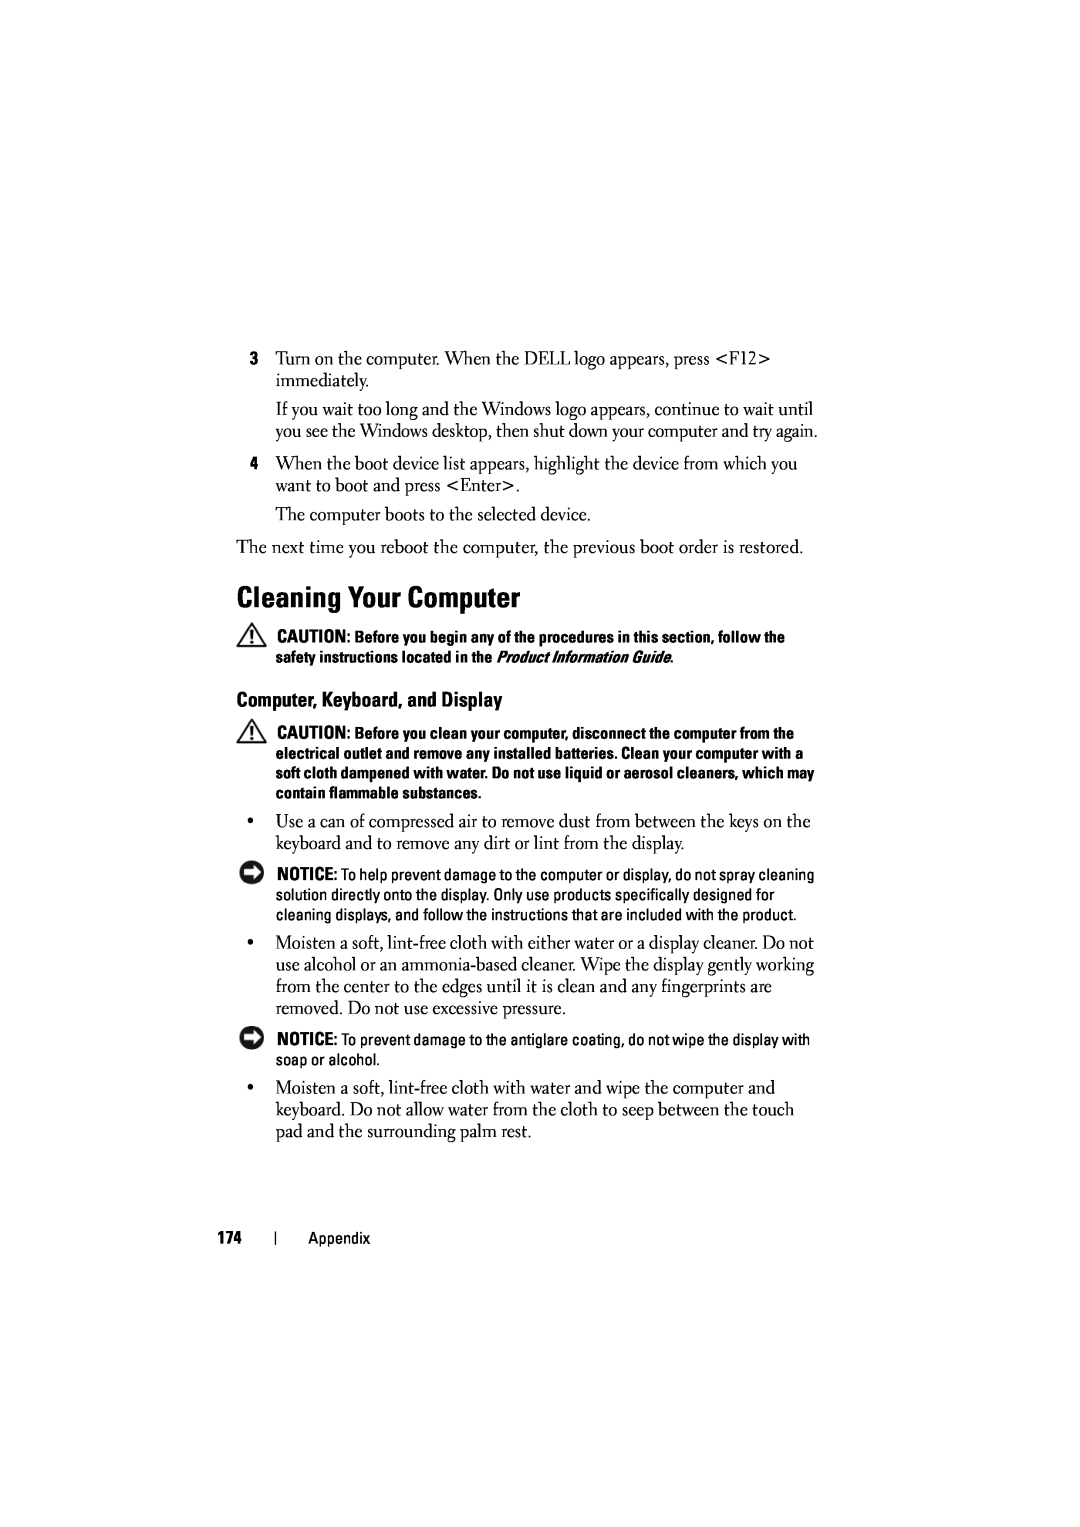 Dell 1525, 1526 owner manual Cleaning Your Computer, Computer, Keyboard, and Display 